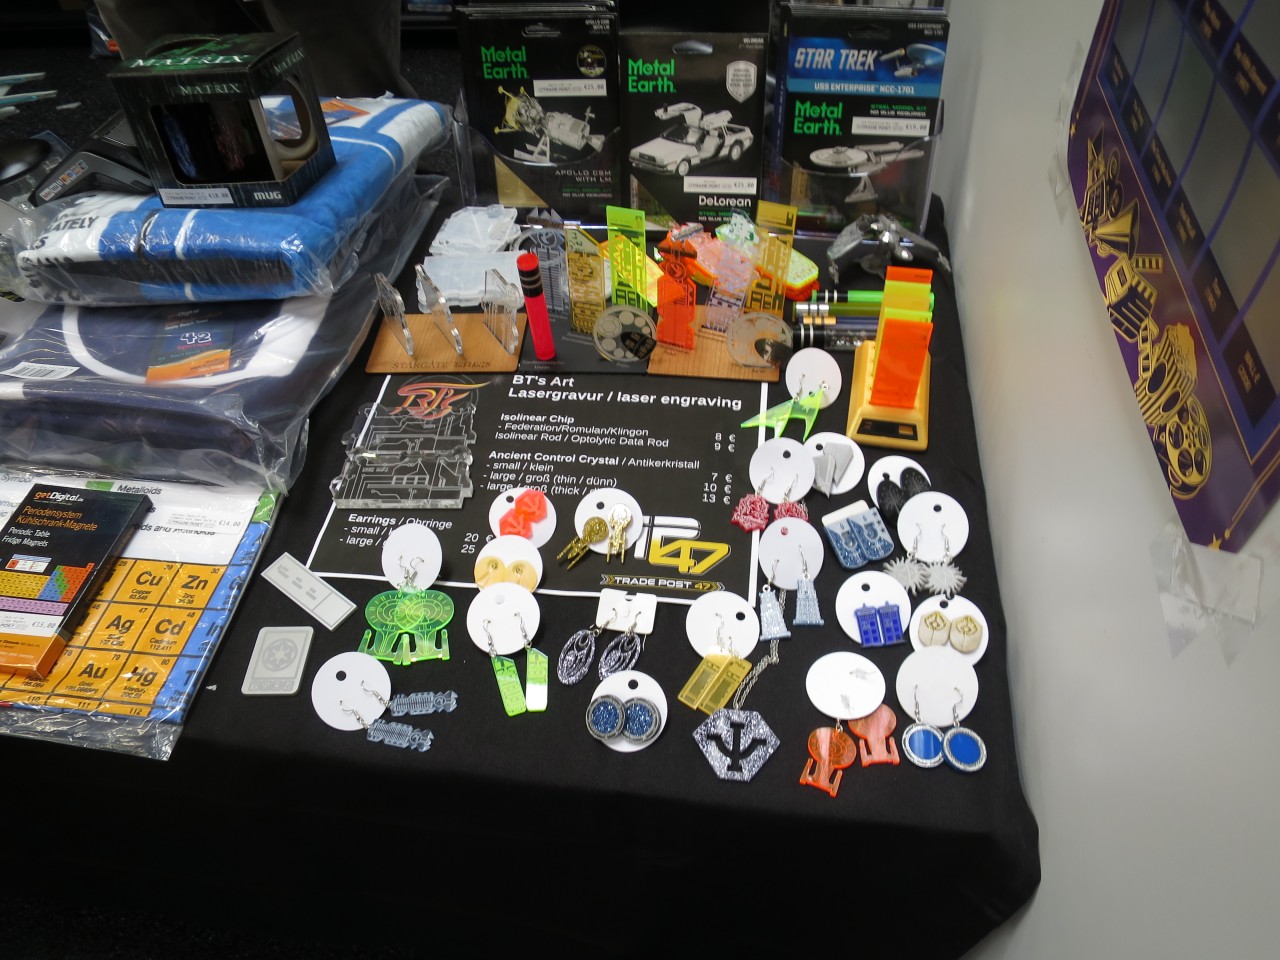 TP47 Newsletter #2: Isolinear Chips, Earrings/Ohrringe, Transformers, and more